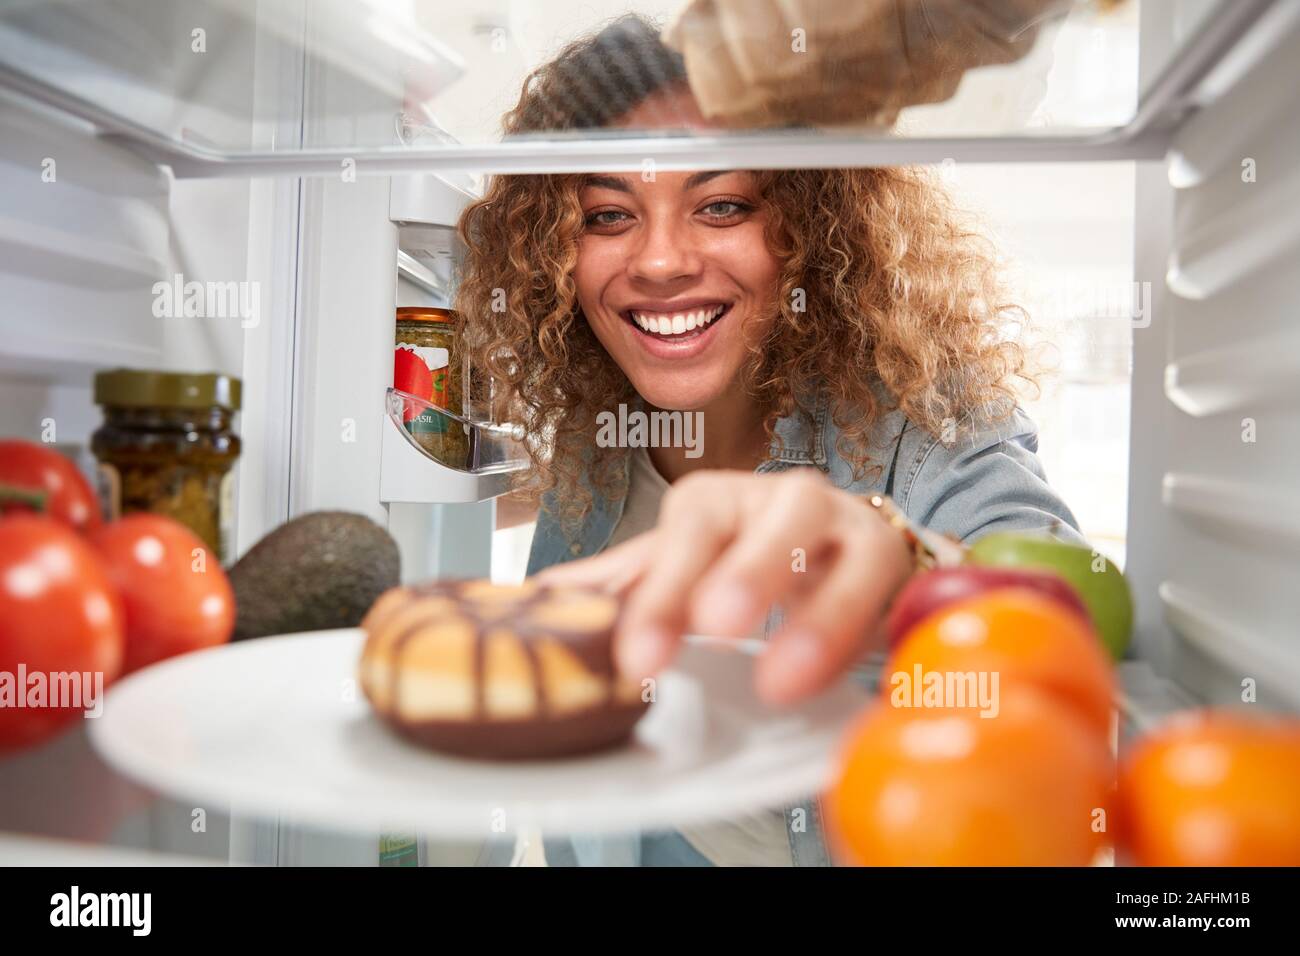 View Looking Out From Inside Of Refrigerator As Woman Opens Door And Reaches For Unhealthy Donut Stock Photo